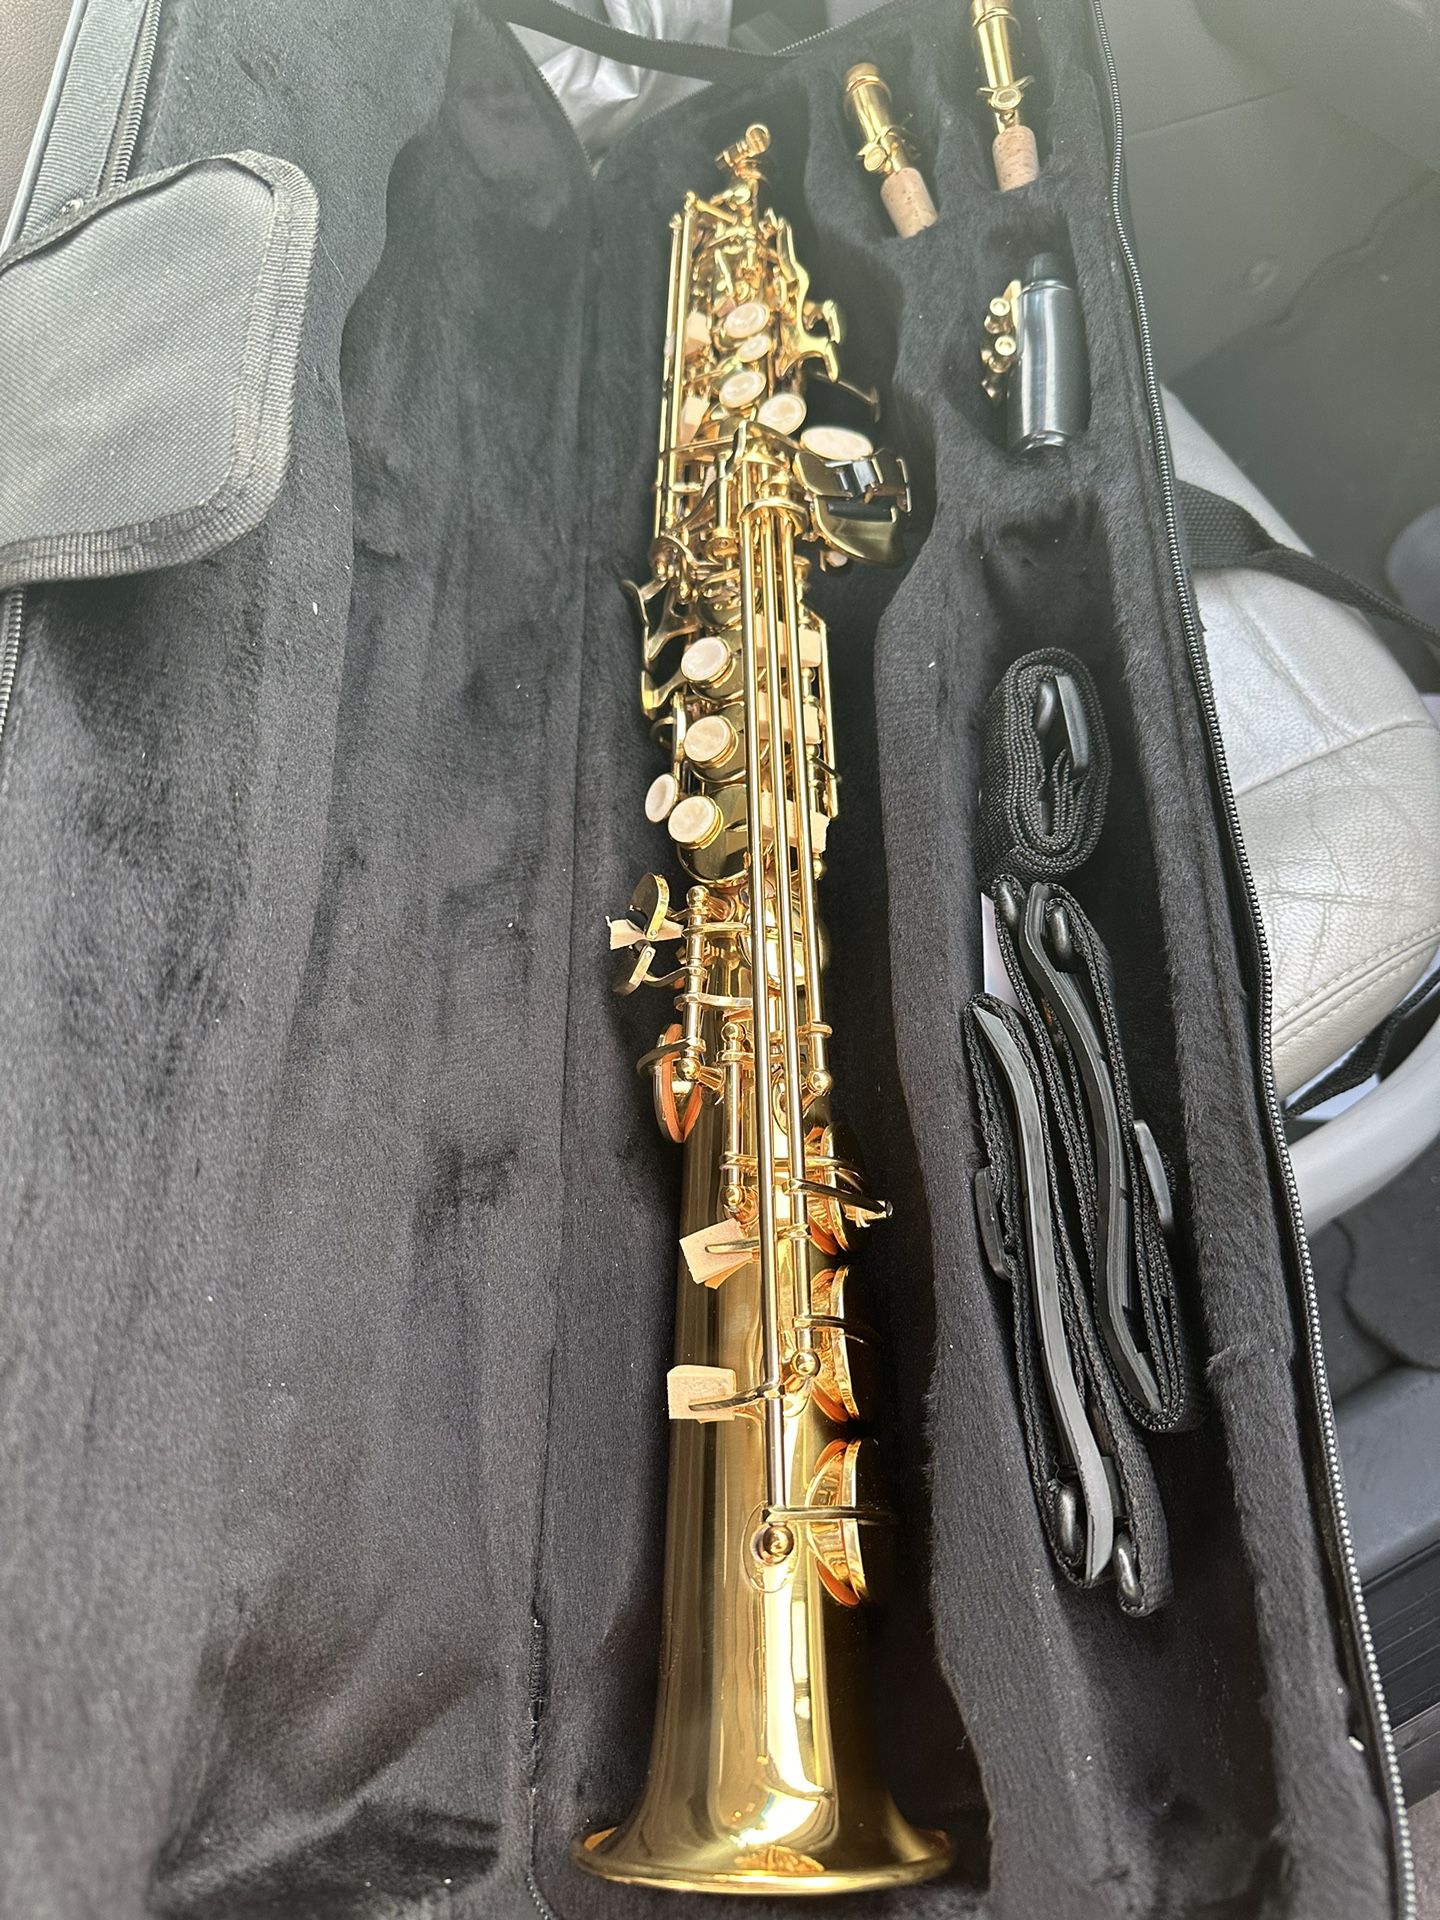 Waco Nice Soprano Saxophone New Reeds Excellent Condition $350 Firm